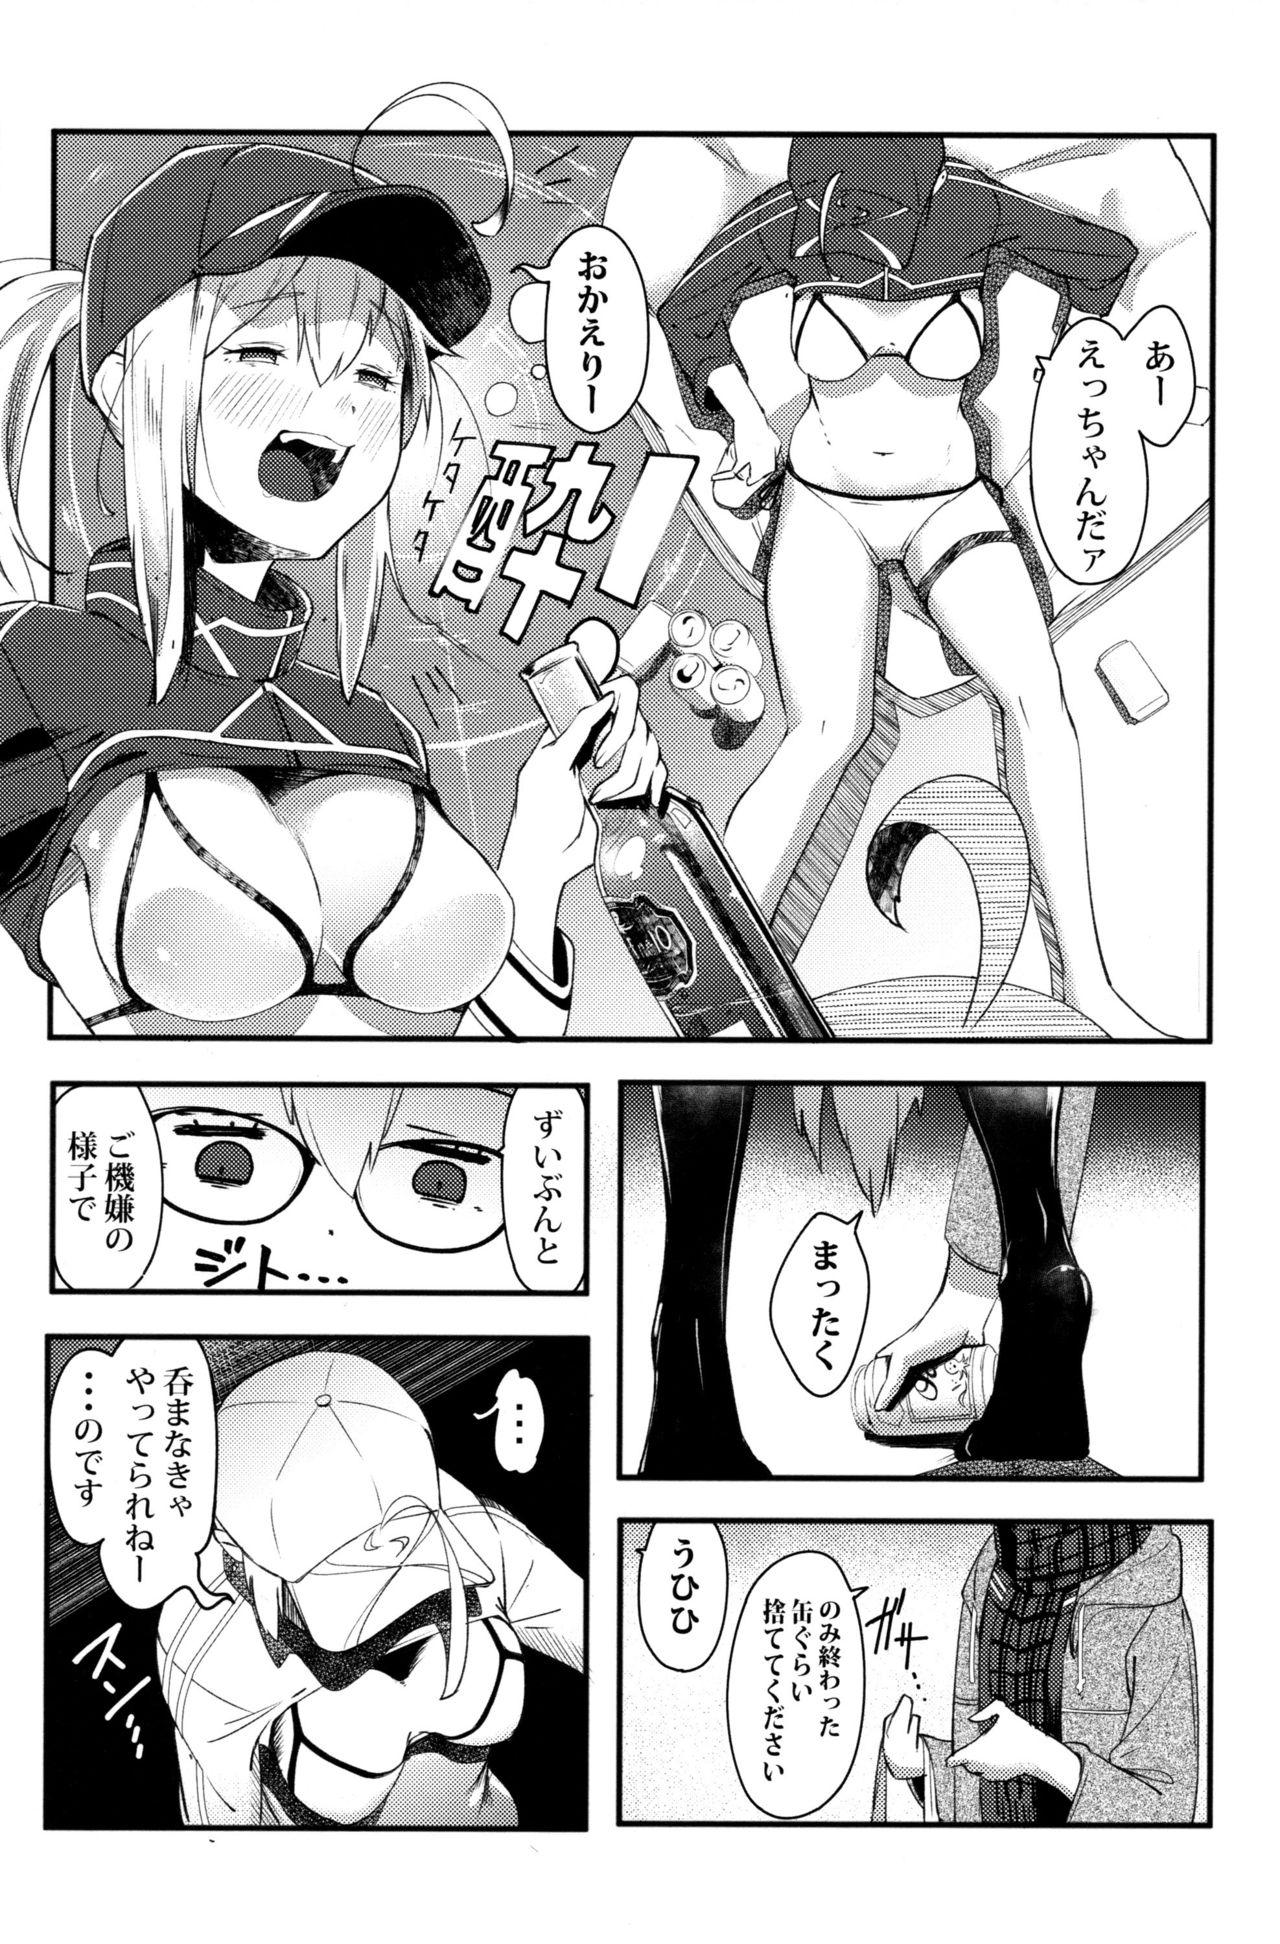 Creampies kiss the future - Fate grand order Shaved - Page 5